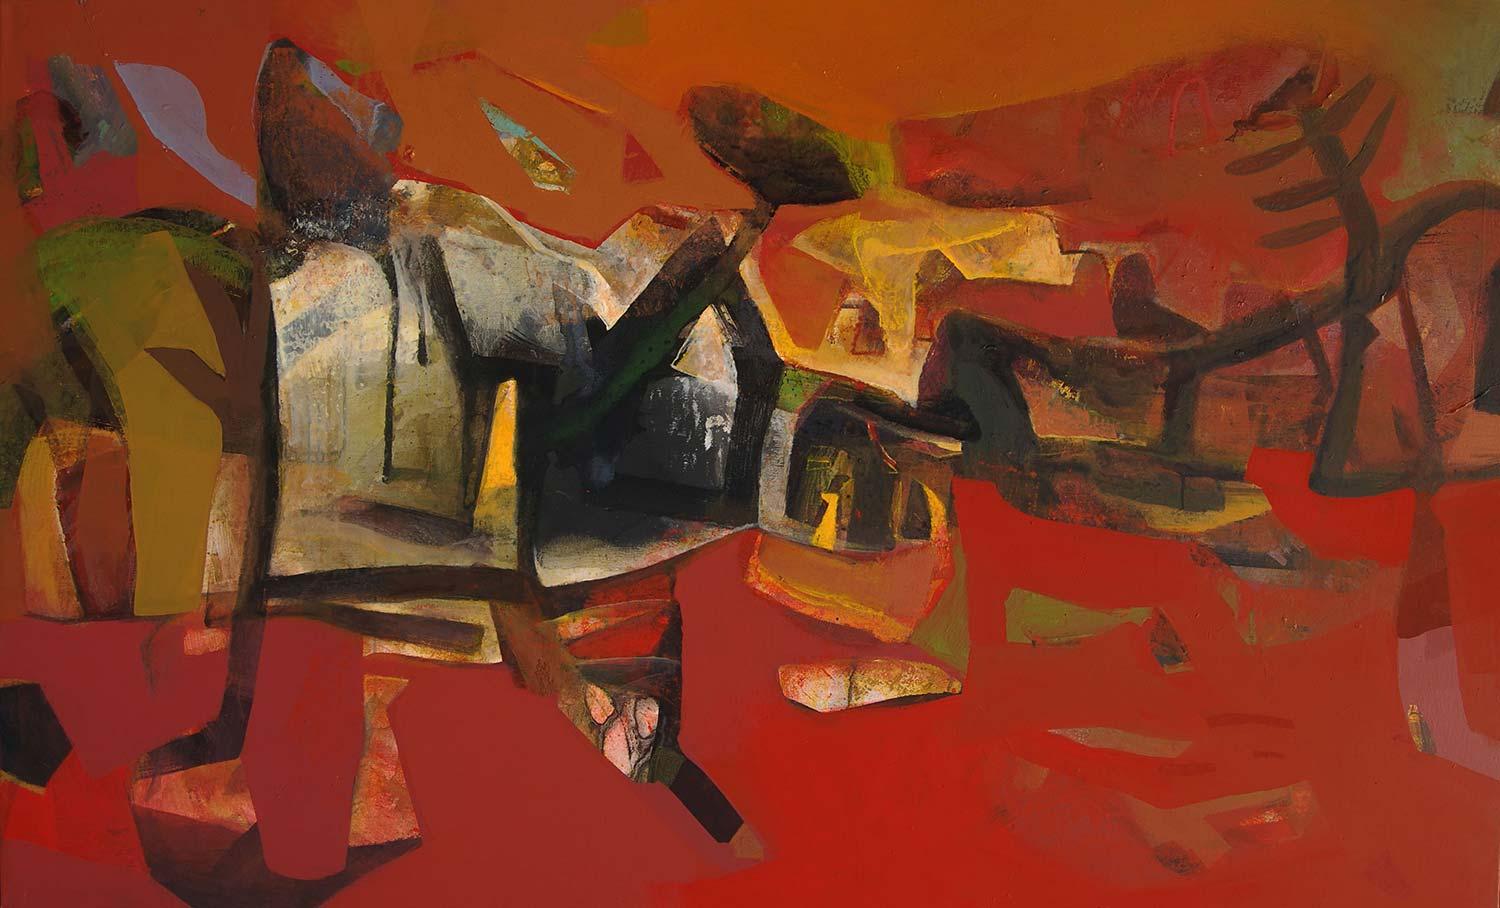 Tapas Ghosal Abstract Painting - Cityscape, Acrylic on Canvas, Red, Brown, Green color, Indian Artist "In Stock"